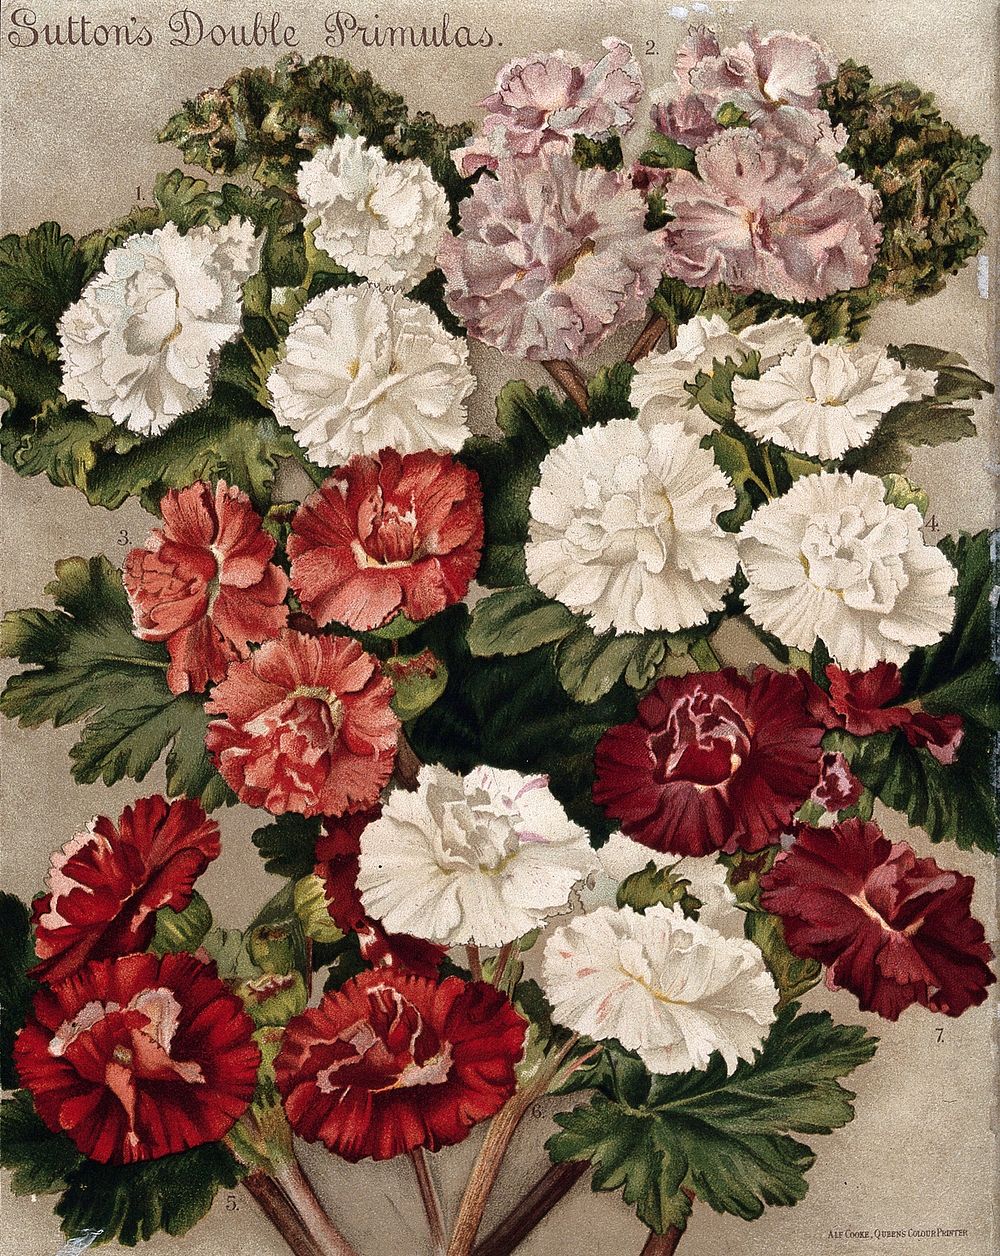 Seven different cultivars of double-flowered primulas. Chromolithograph, c. 1890.